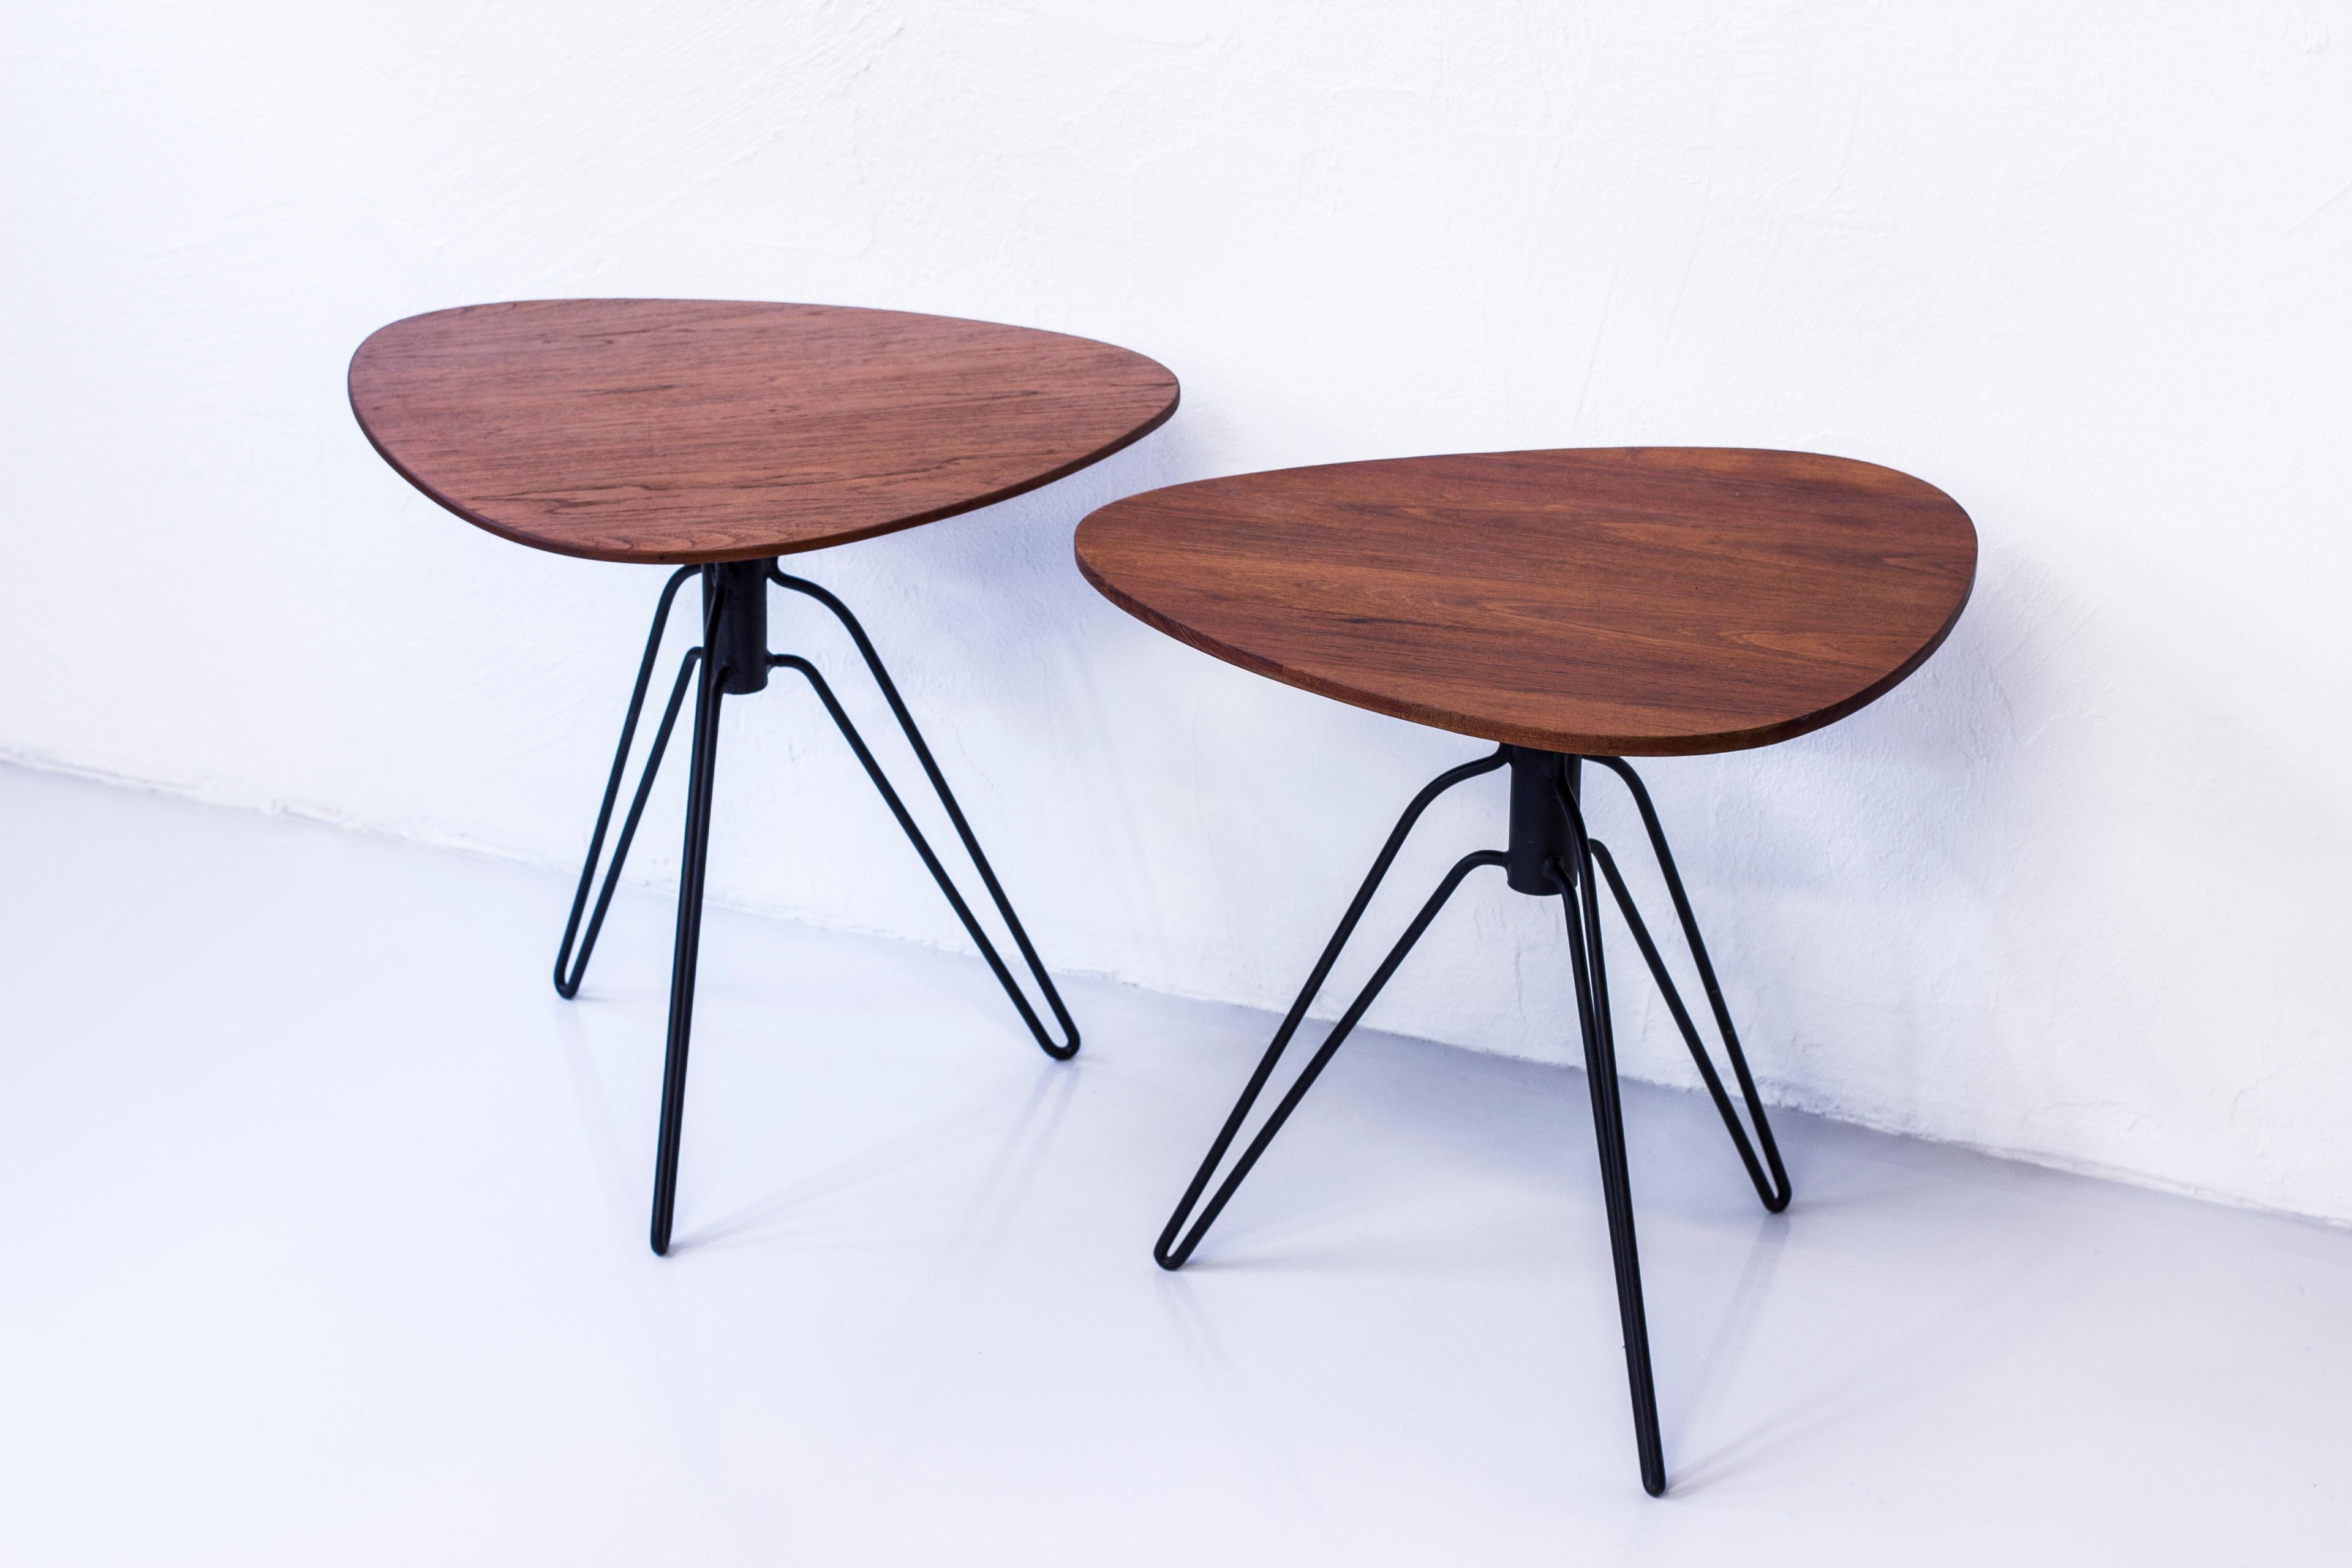 Pair of side tables designed by Hans Agne Jakobsson. Early, Pre-Marakryd production made in Åhus during the early 1950s. Made from solid teak and black lacquered metal. One table signed with original label. Very good condition with light signs of